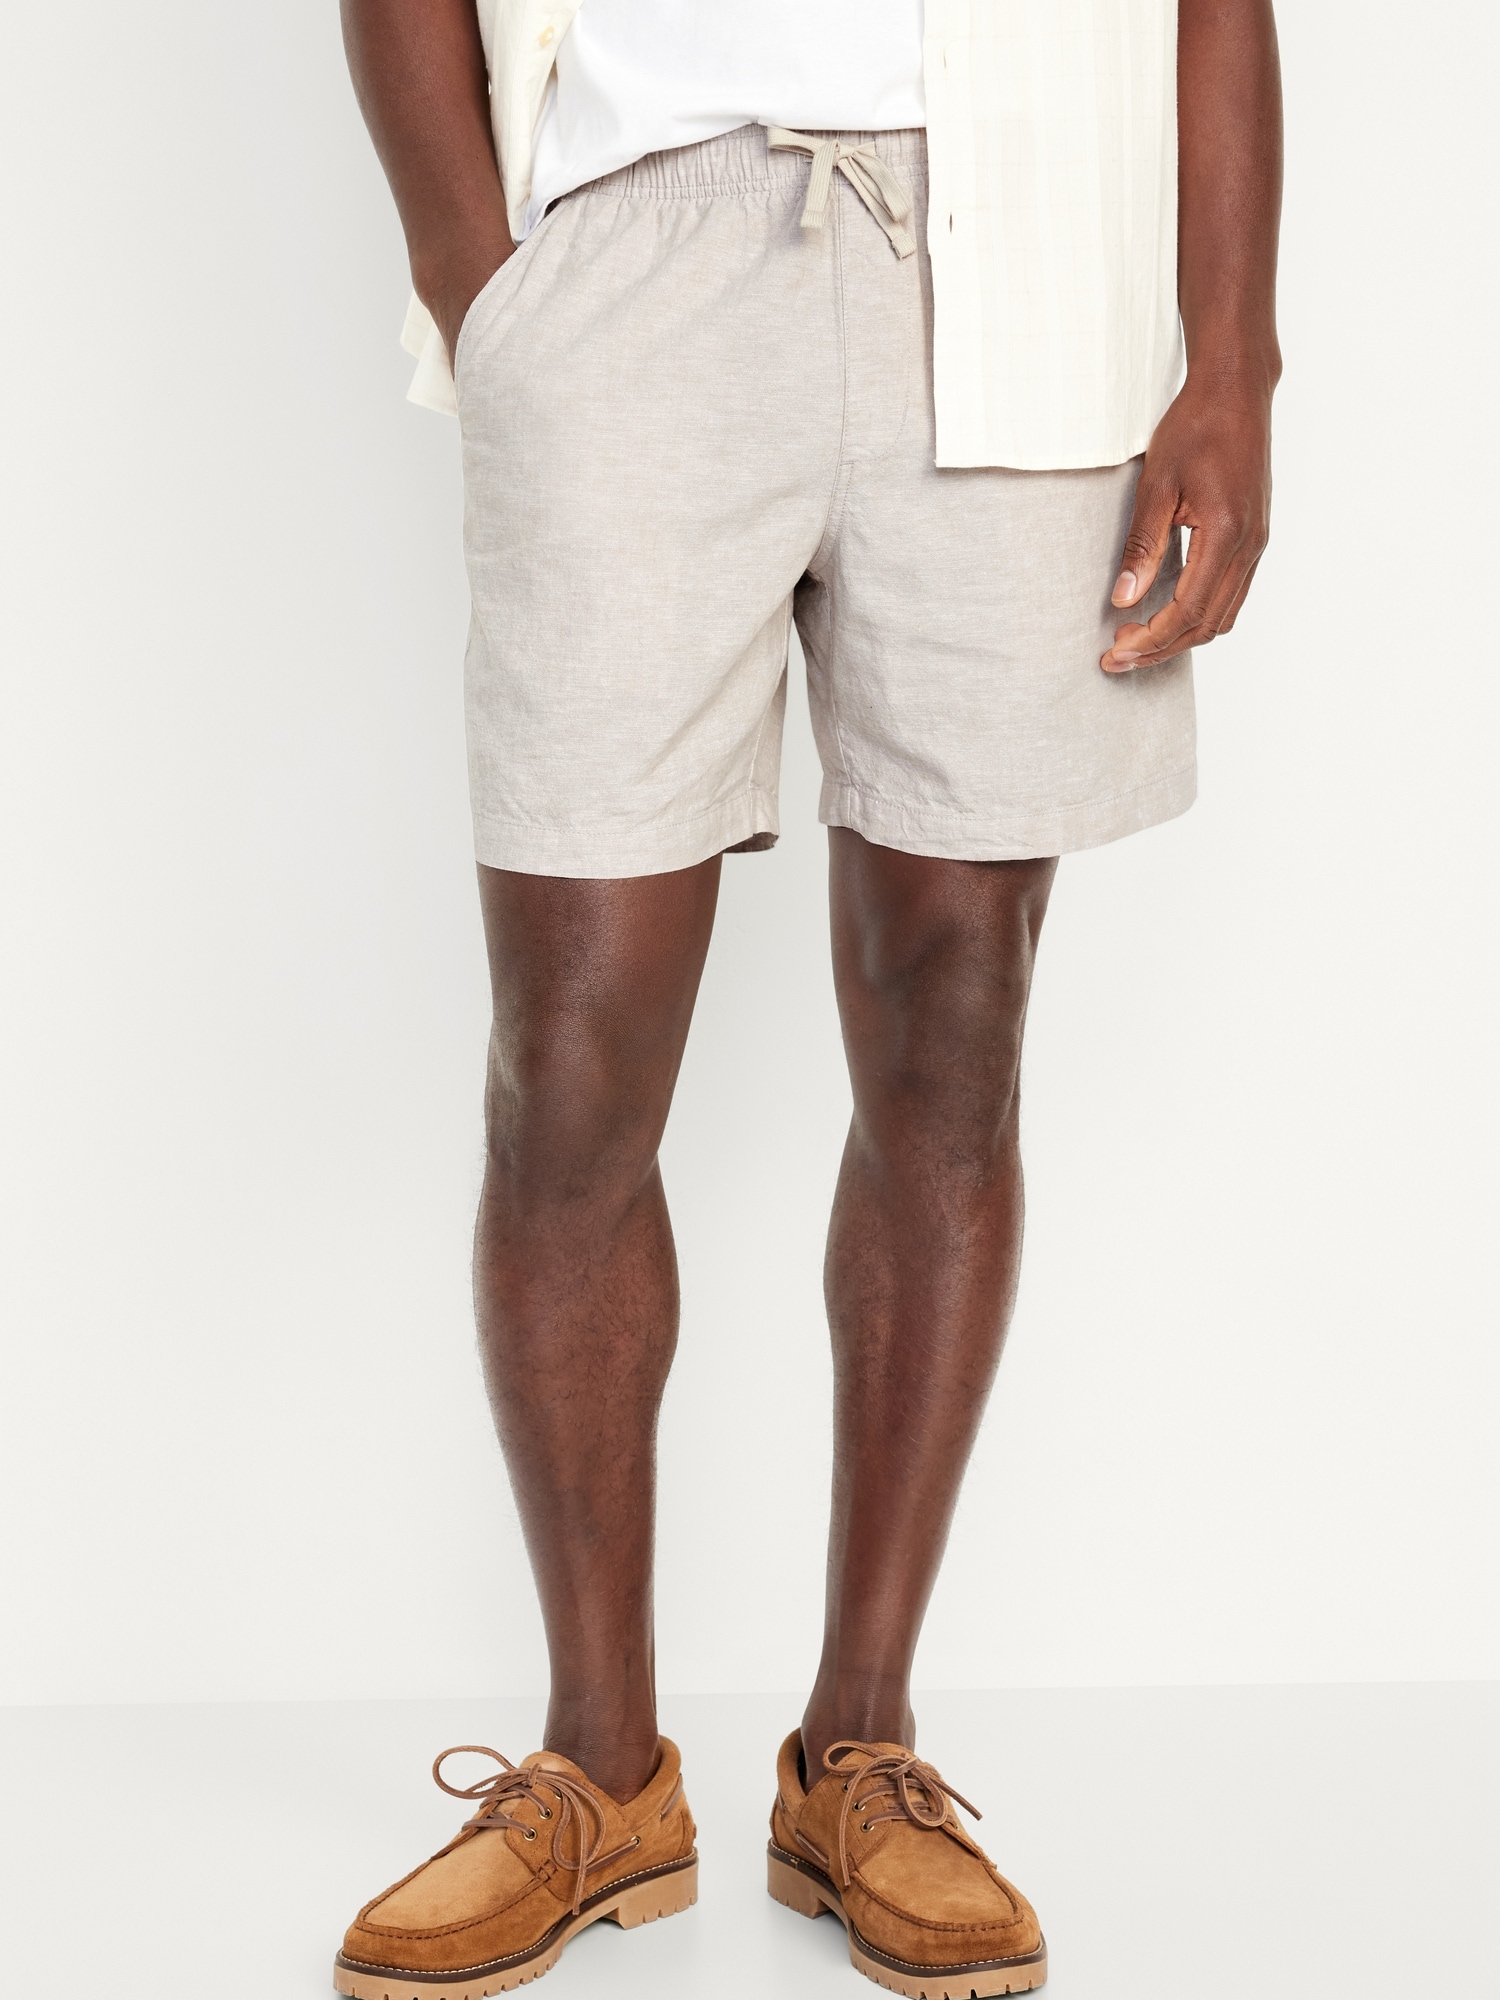 COS - The beige linen shorts: a warm-weather classic.